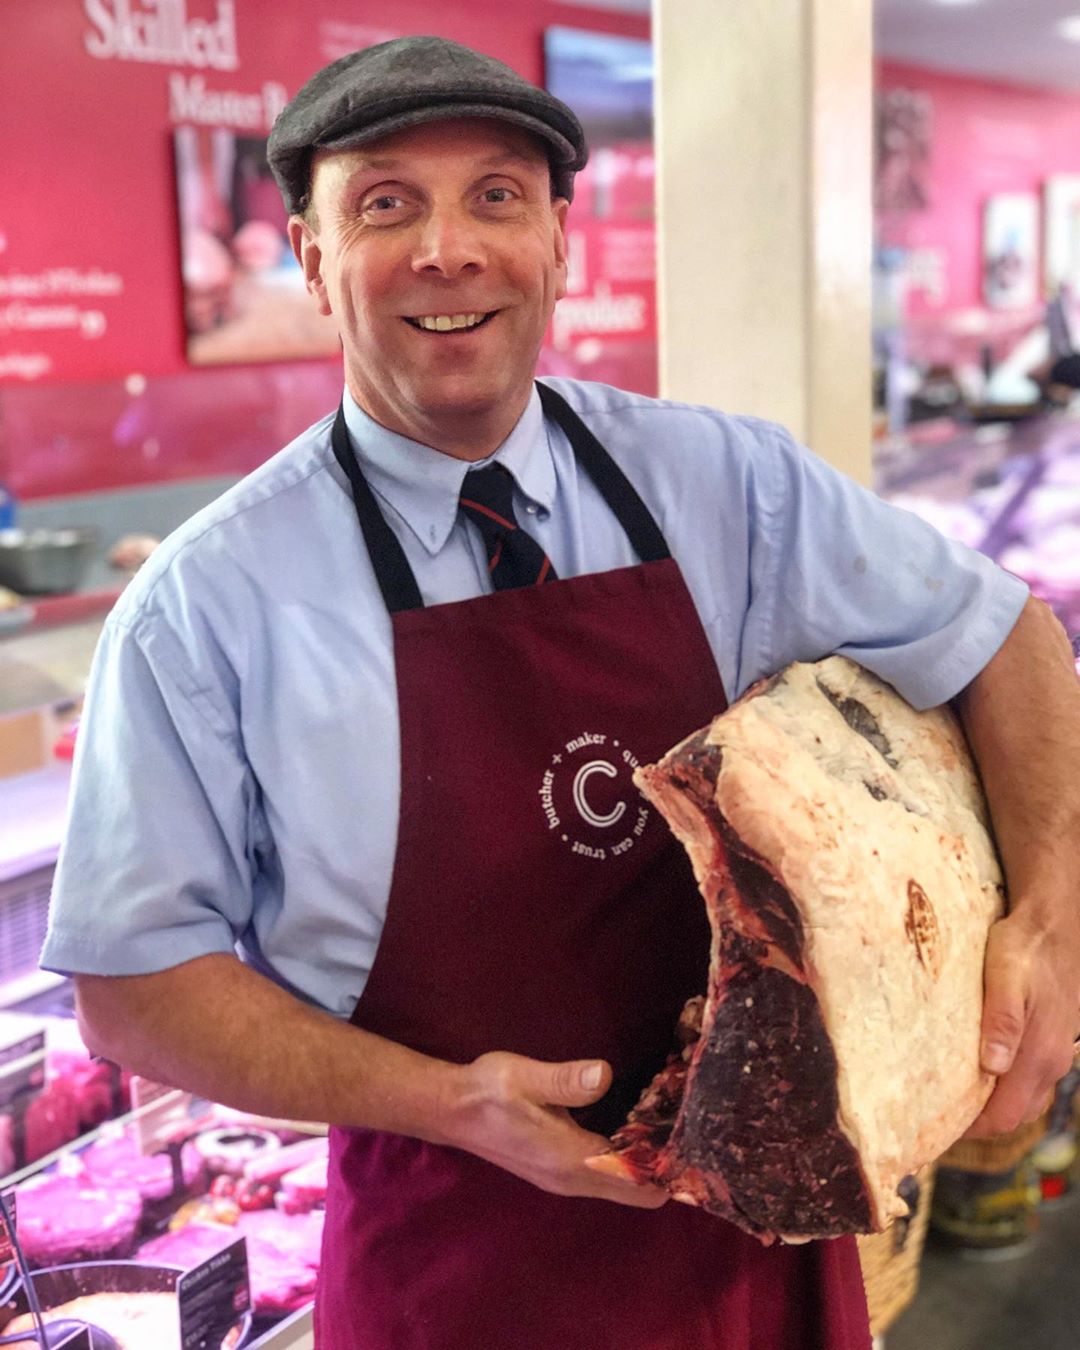 Our 35 Day Dry Aged Beef is now available!🥩 From local farms, matured for longer in our dry ageing rooms which produces amazing flavour and melt in the mouth texture. 
Available at our Orton Grange and Brampton Food Halls and the Cumbrian Food Hall in Penrith.